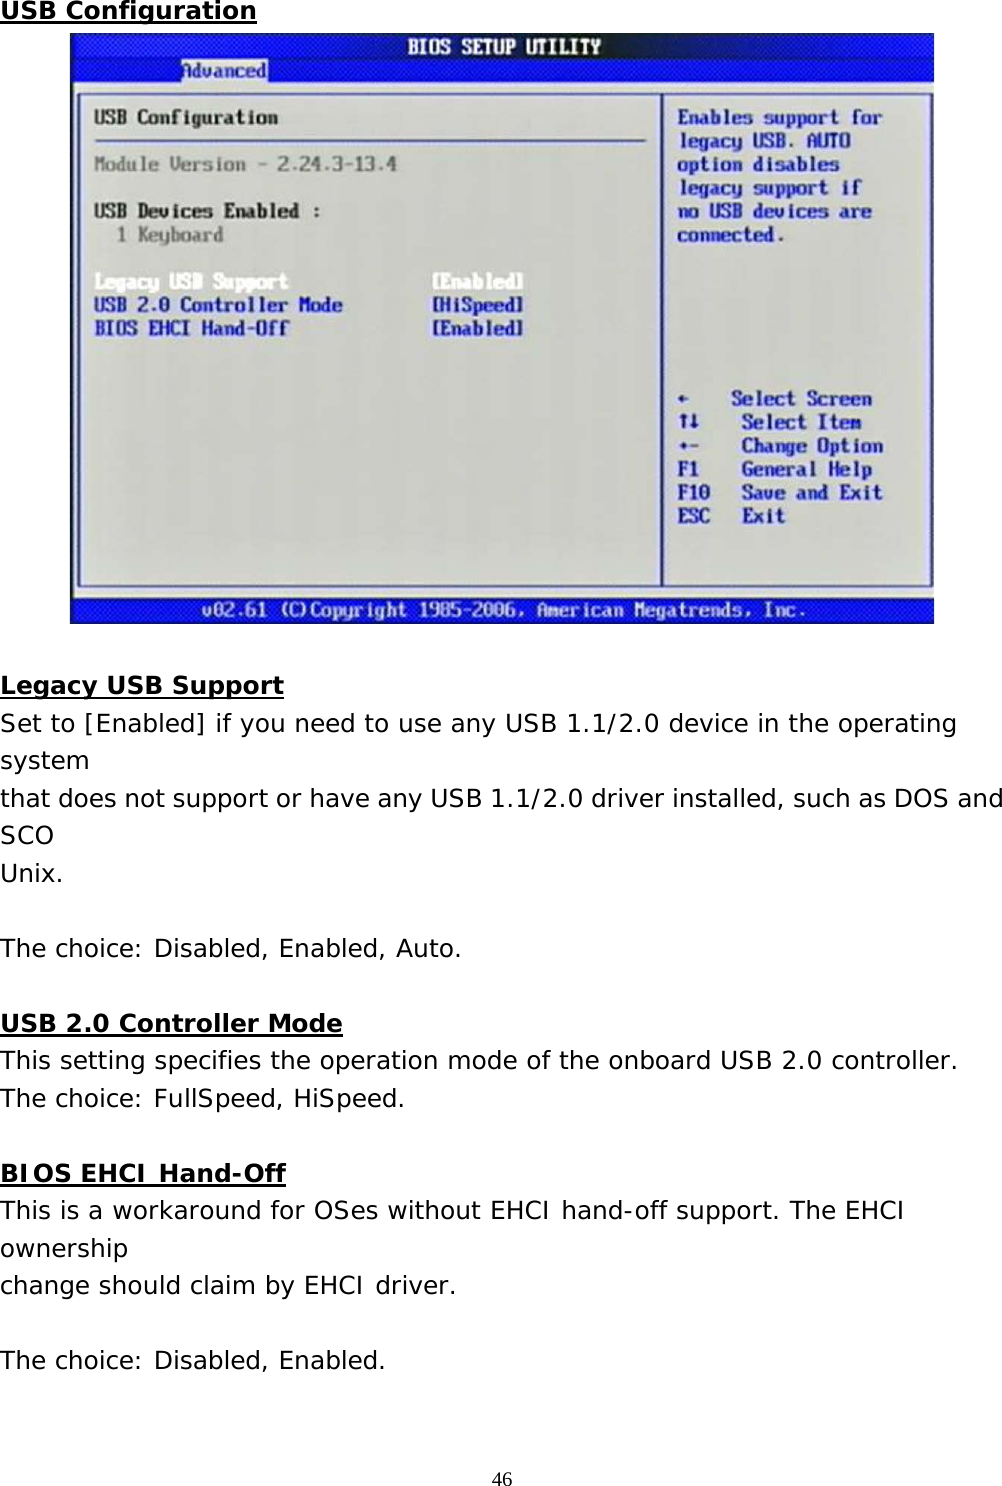  46 USB Configuration   Legacy USB Support Set to [Enabled] if you need to use any USB 1.1/2.0 device in the operating system that does not support or have any USB 1.1/2.0 driver installed, such as DOS and SCO Unix.  The choice: Disabled, Enabled, Auto.  USB 2.0 Controller Mode This setting specifies the operation mode of the onboard USB 2.0 controller. The choice: FullSpeed, HiSpeed.  BIOS EHCI Hand-Off This is a workaround for OSes without EHCI hand-off support. The EHCI ownership change should claim by EHCI driver.  The choice: Disabled, Enabled.  